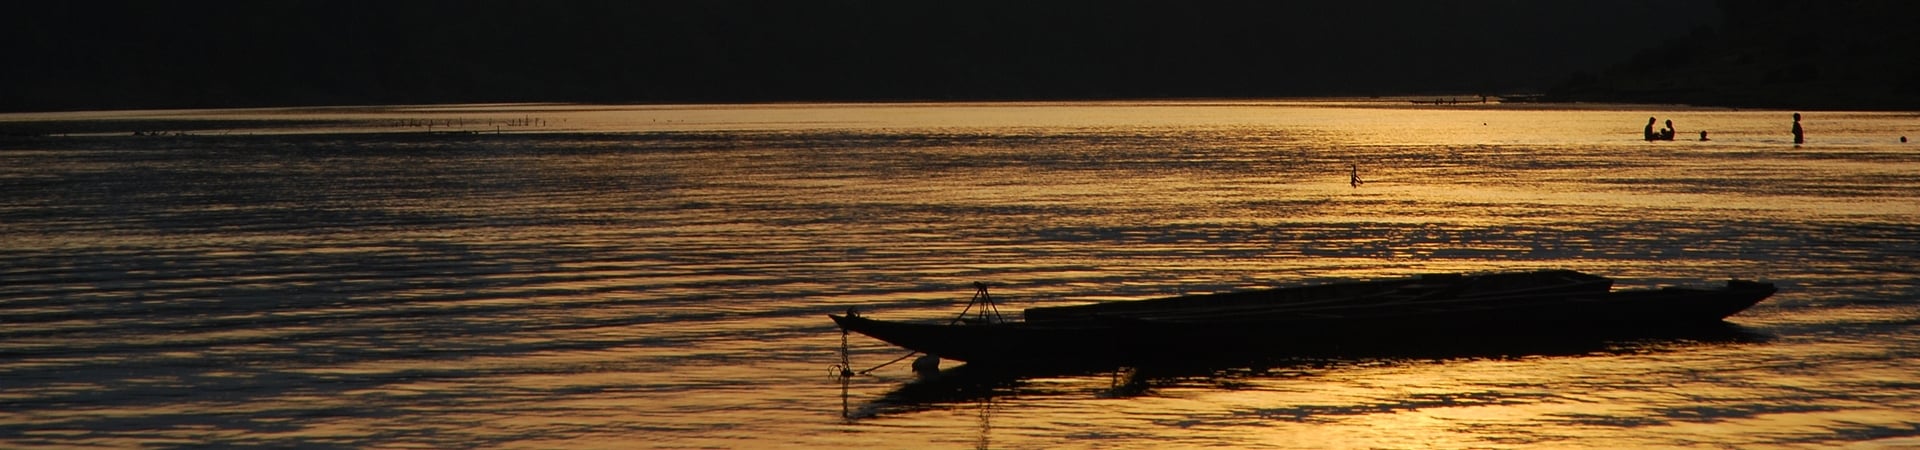 The Mighty Mekong, Asia’s Lifeblood